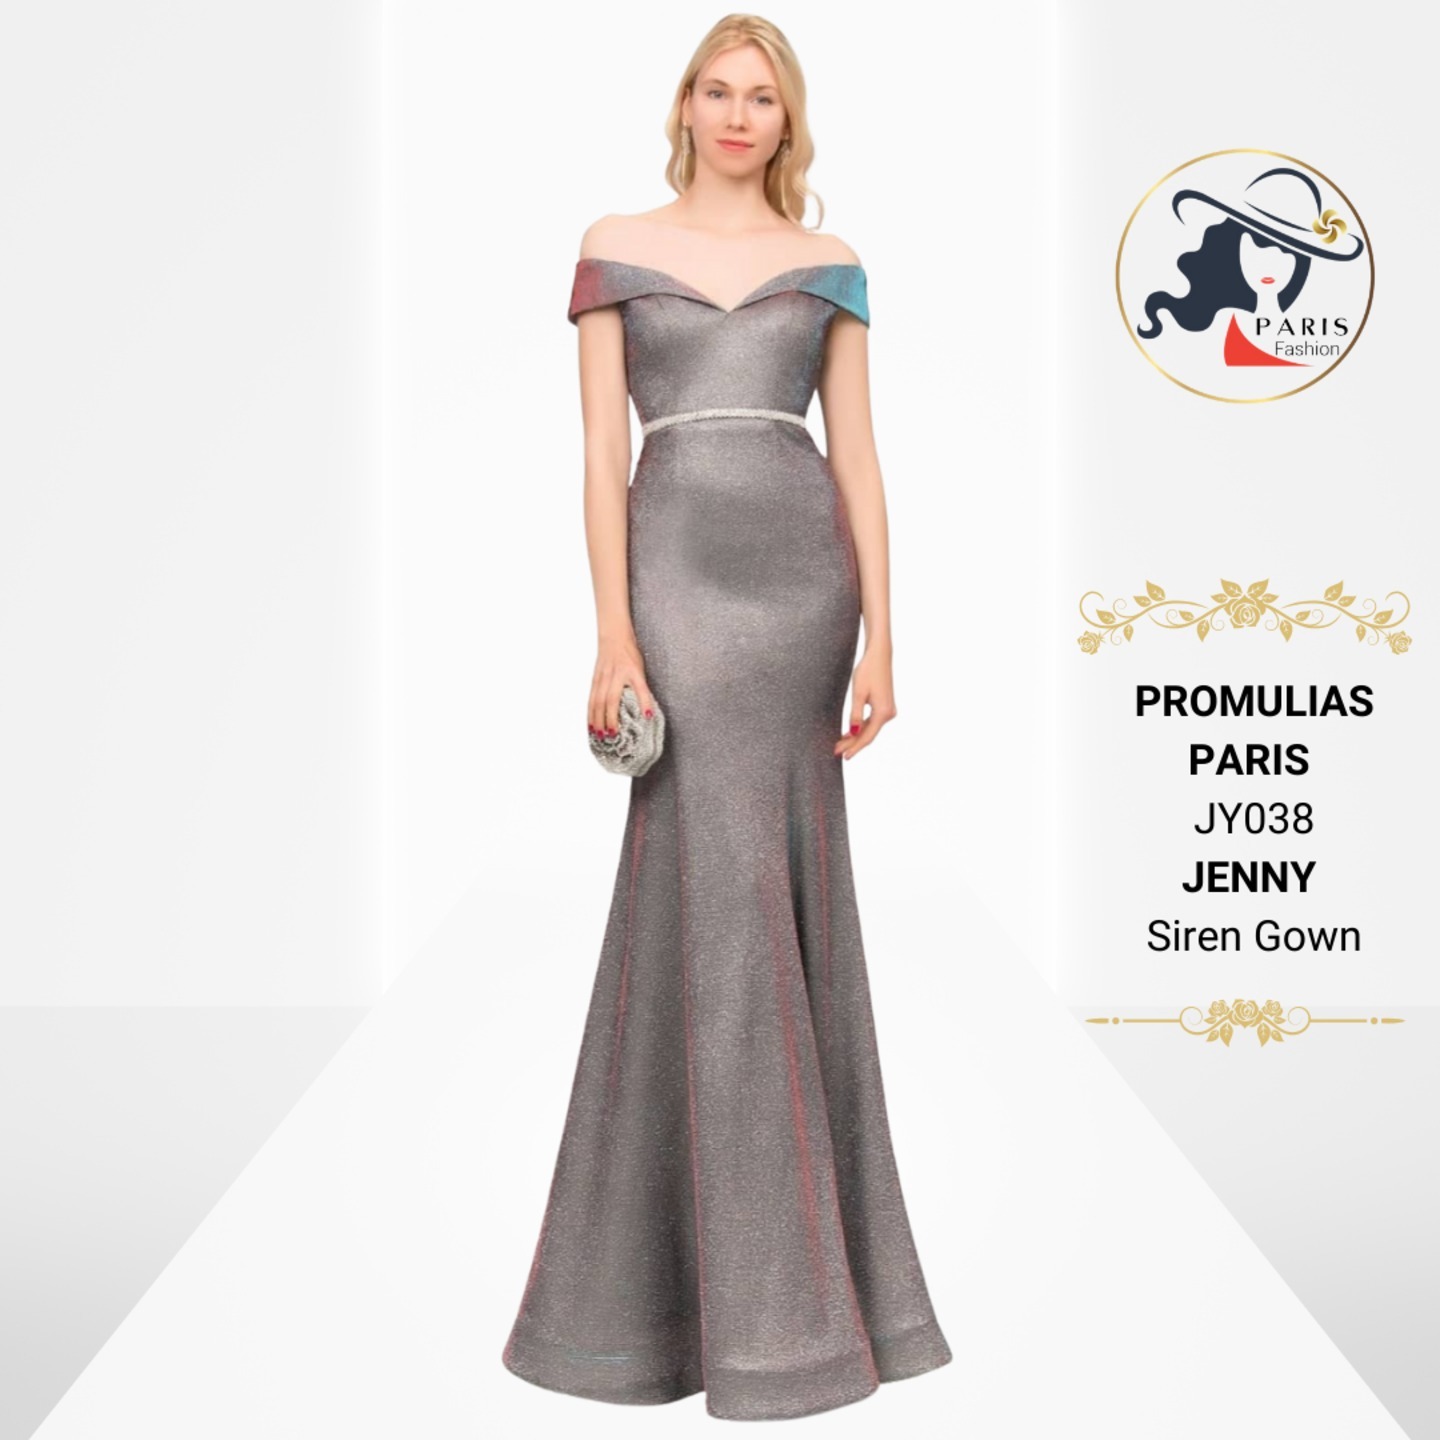 PROMULIAS PARIS JY038 JENNY OFF SHOULDER SHIMMERY MULTI FACETED RED SIREN GOWN